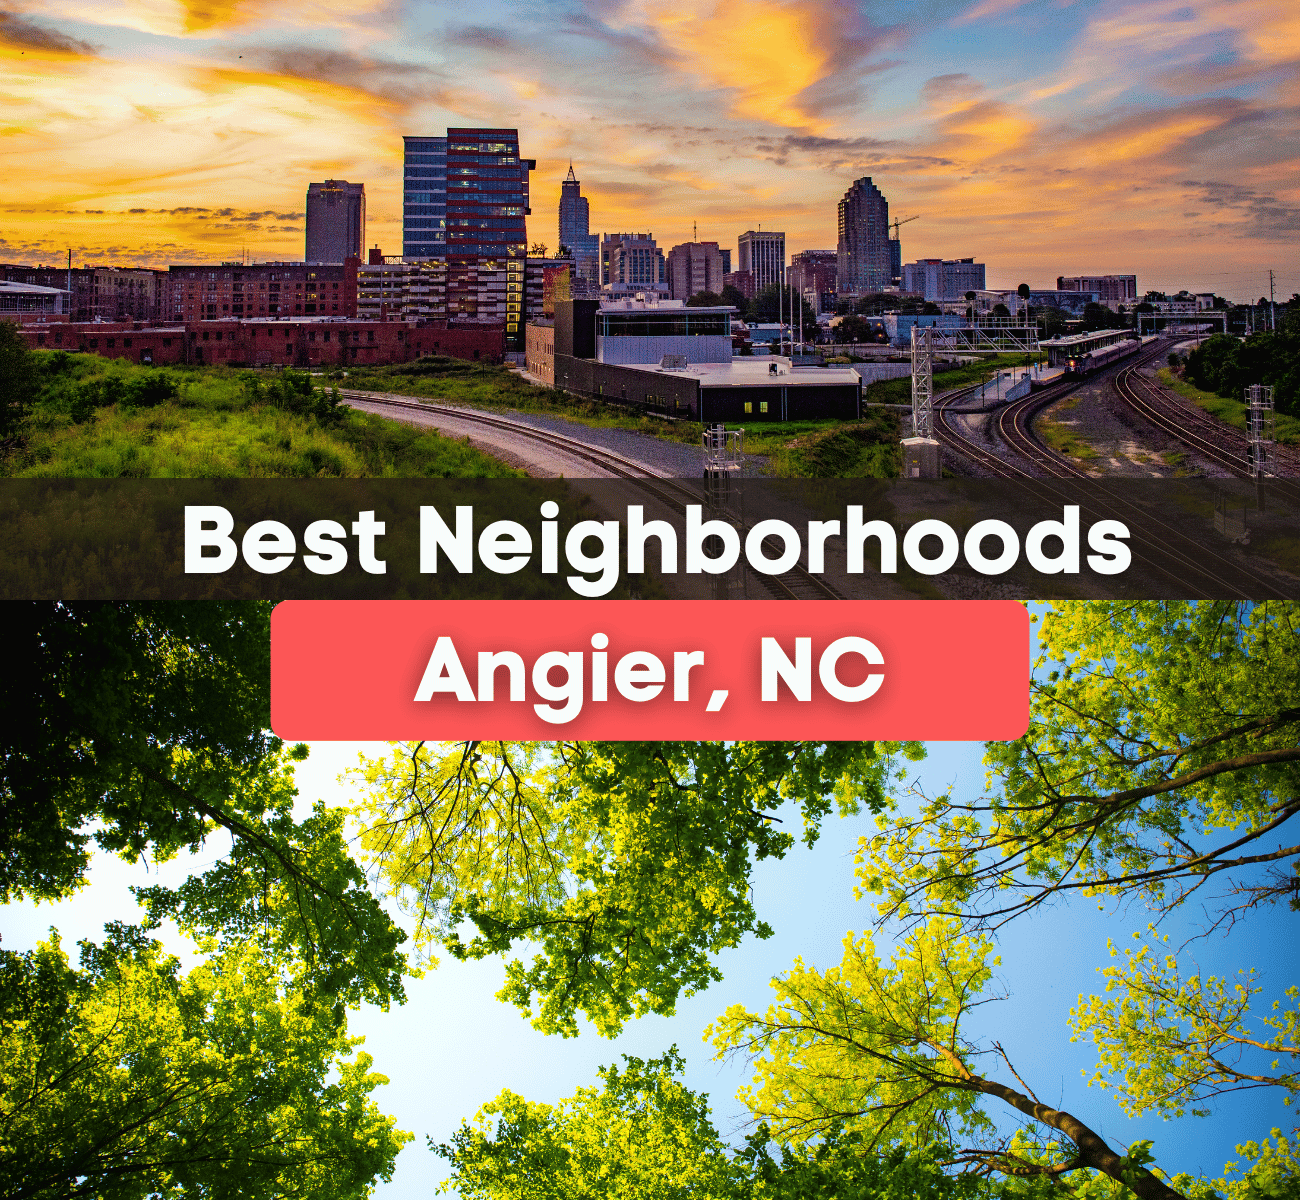 the best neighborhoods in Angier, NC - Raleigh skyline and trees in a park